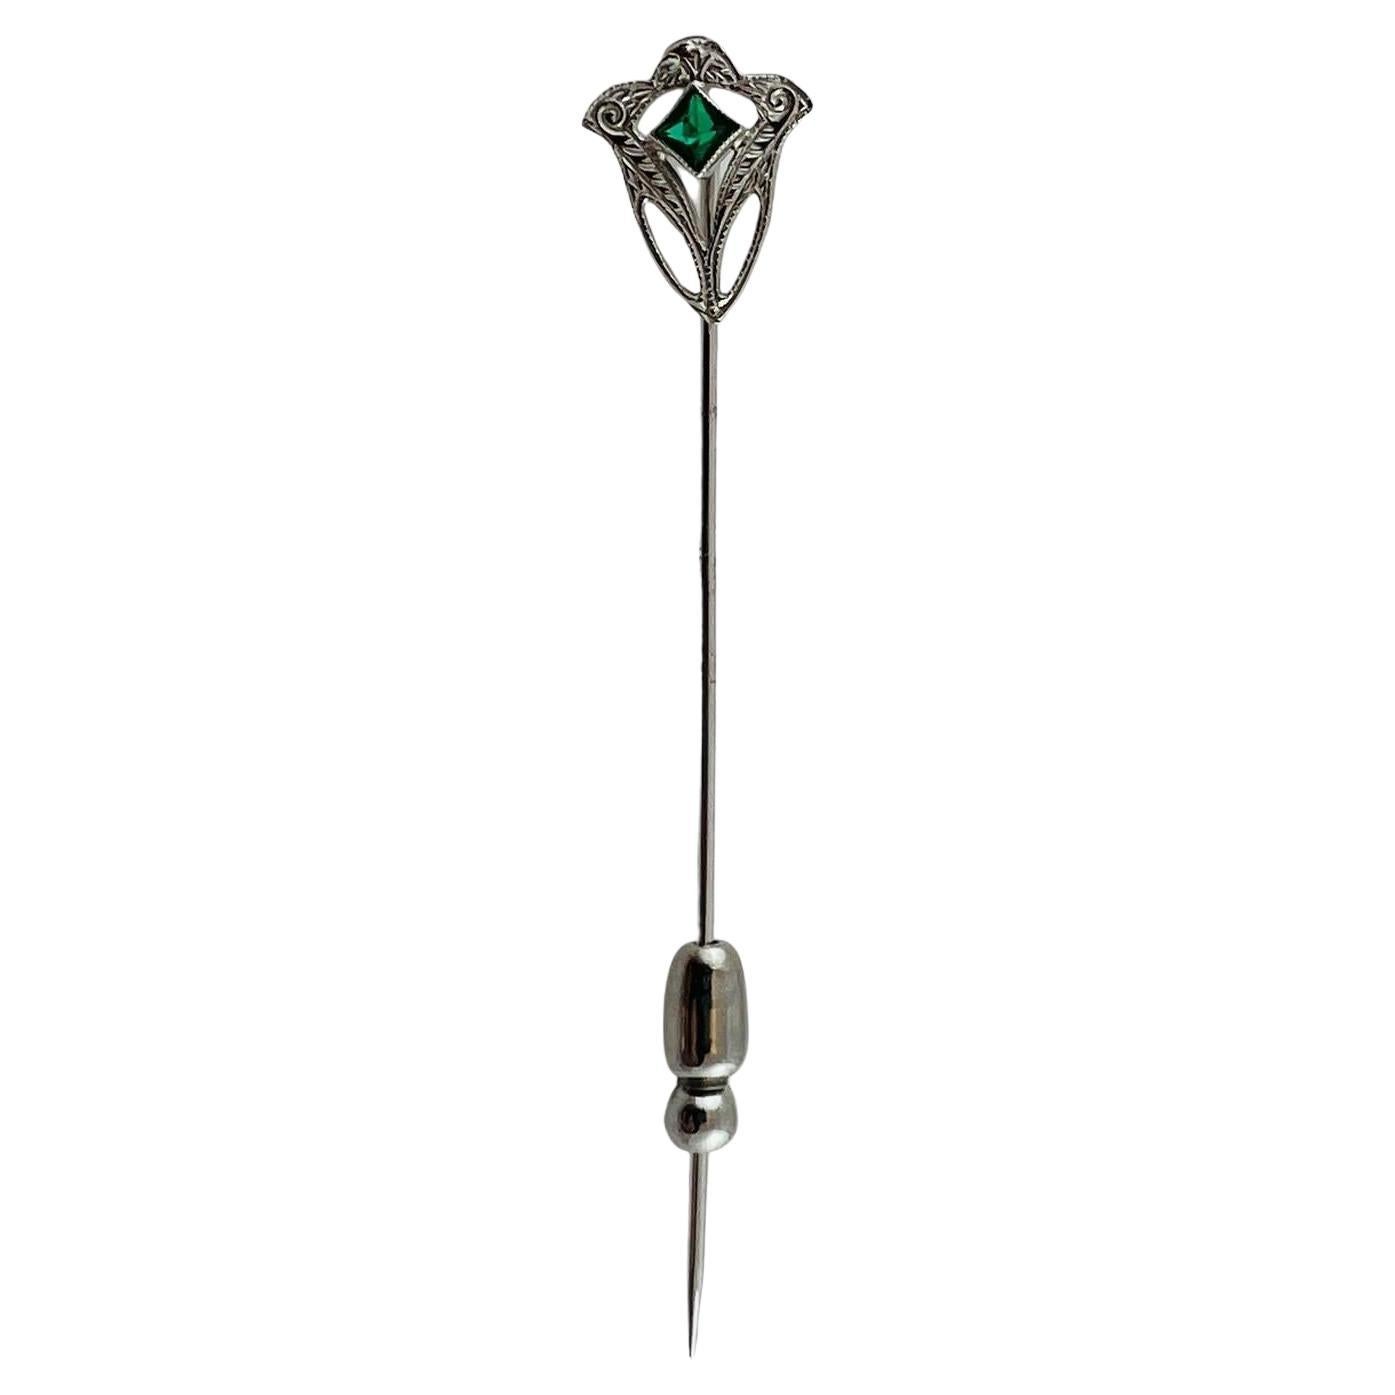 10K White Gold Stick Pin with Green Glass Stone #15688 For Sale